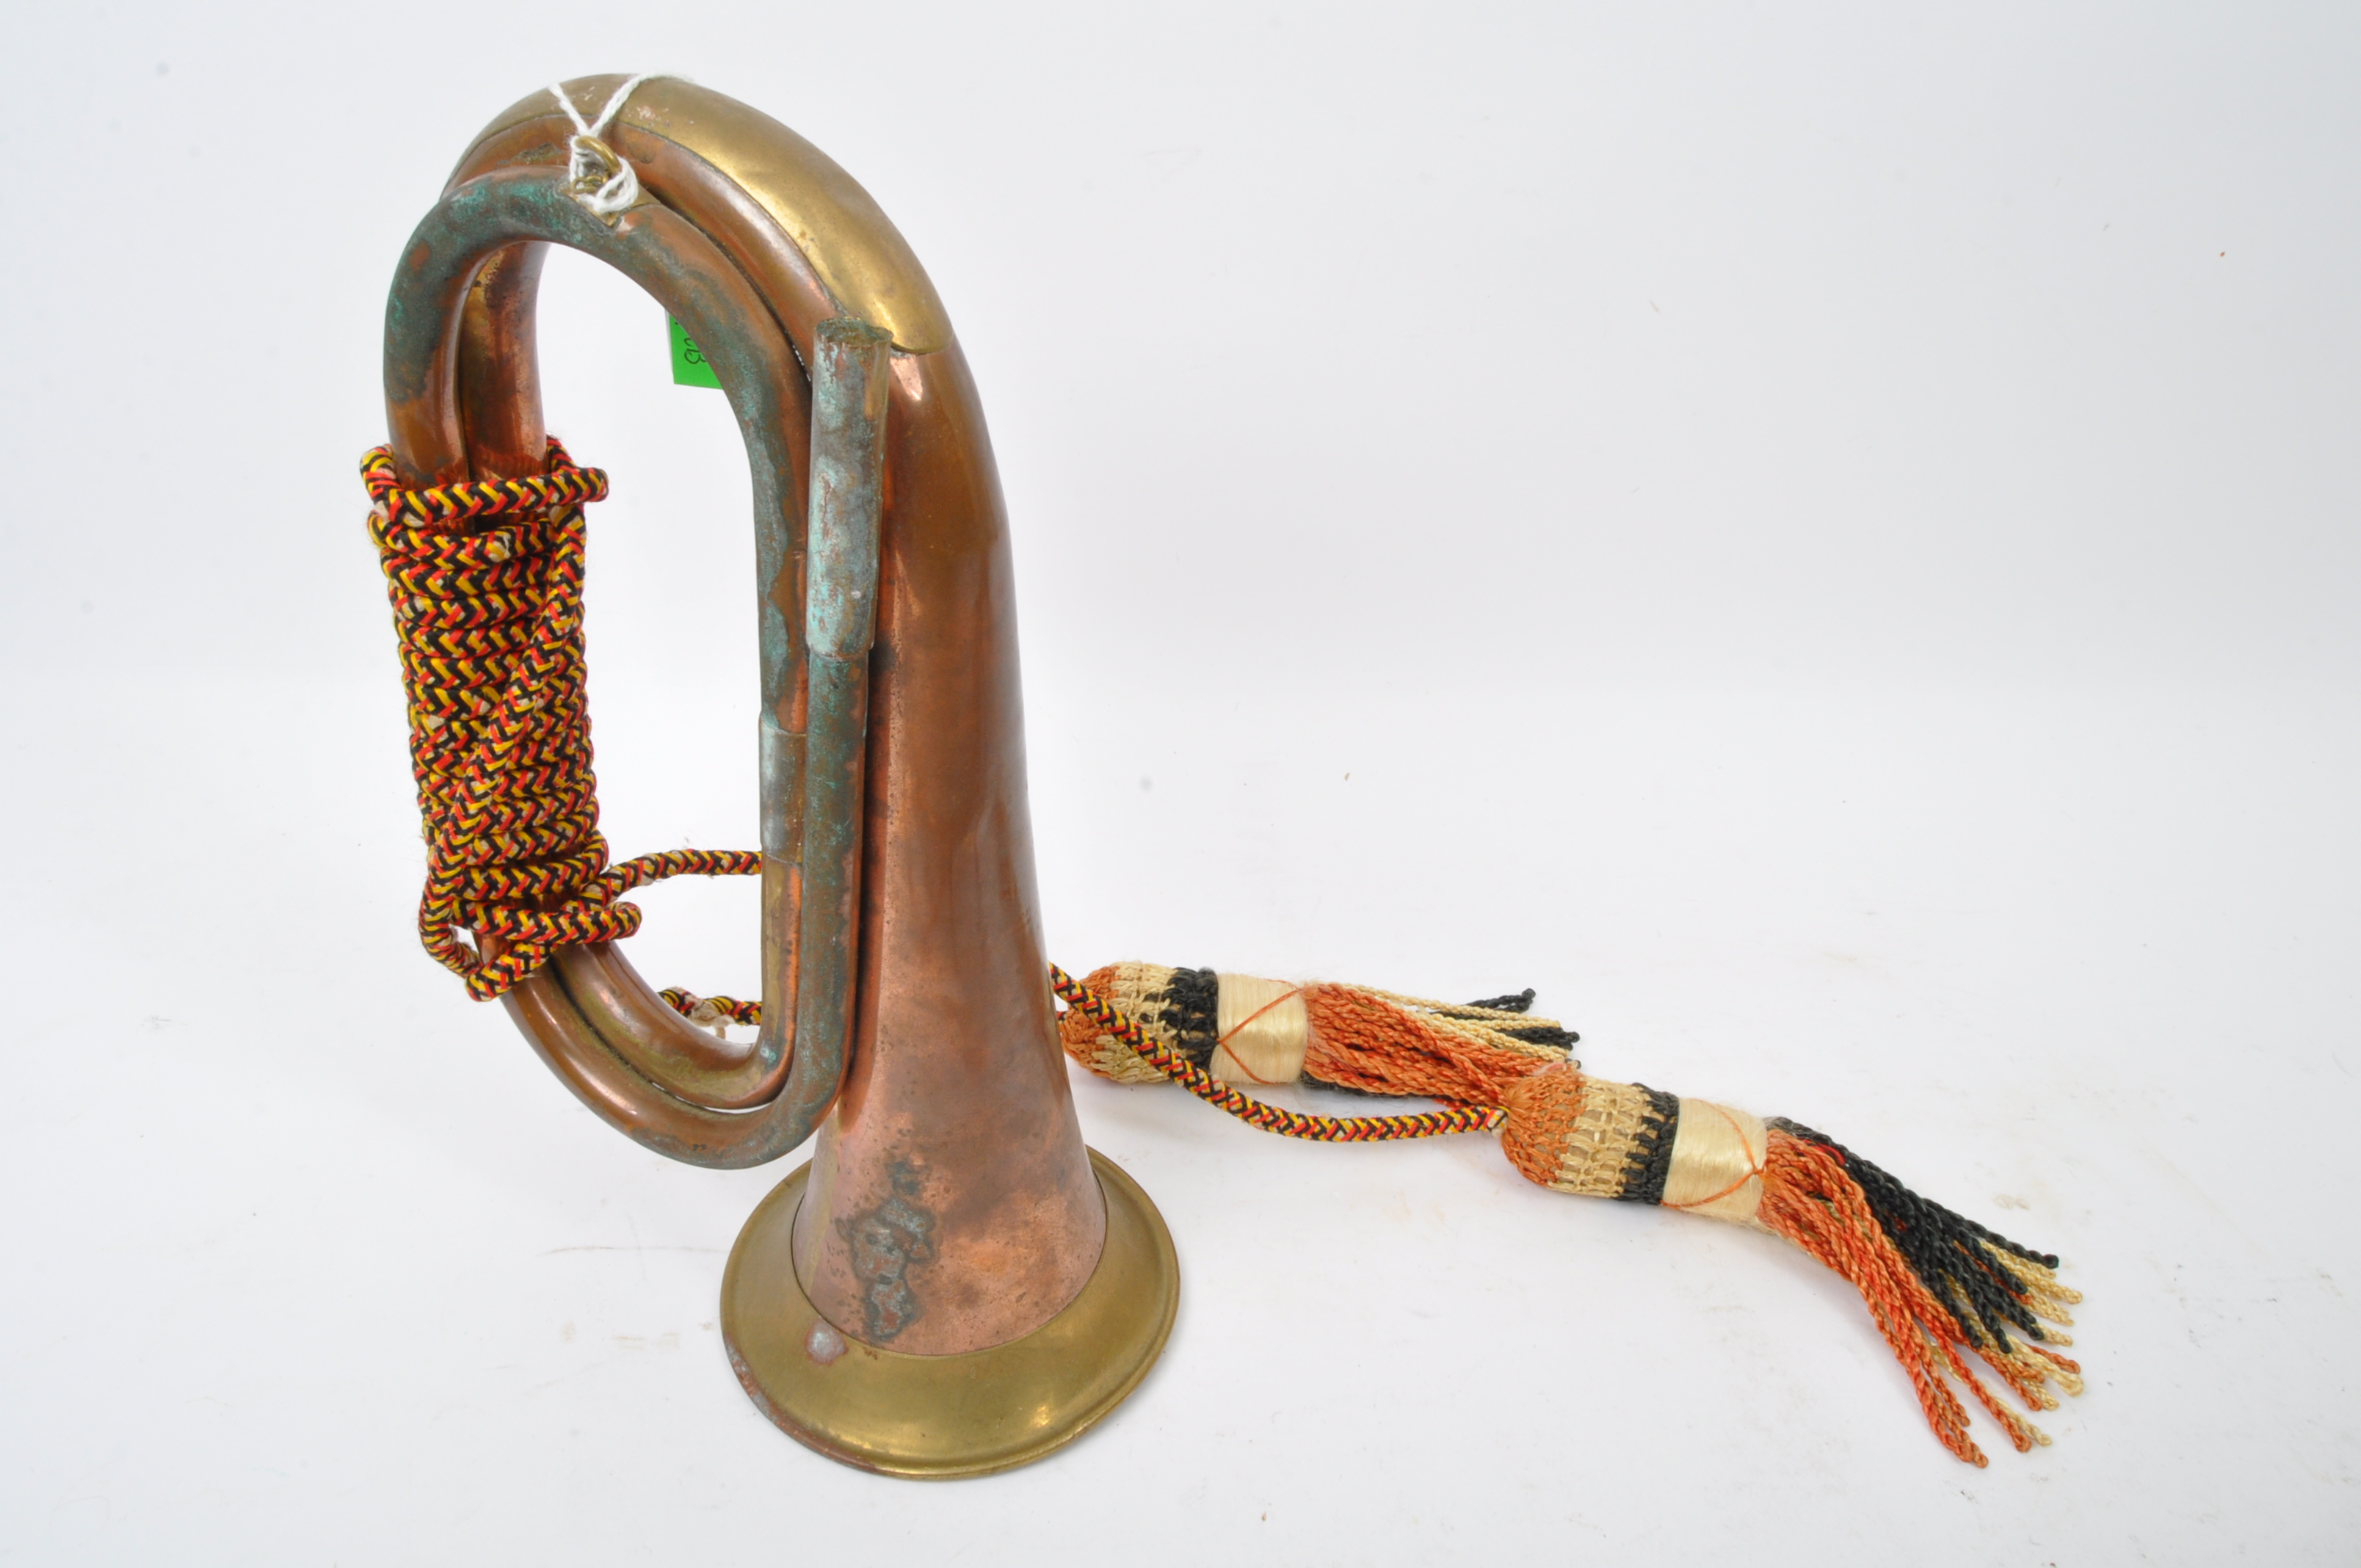 PAIR OF 20TH CENTURY COPPER HORNS - POST HORN & BUGLE - Image 4 of 7